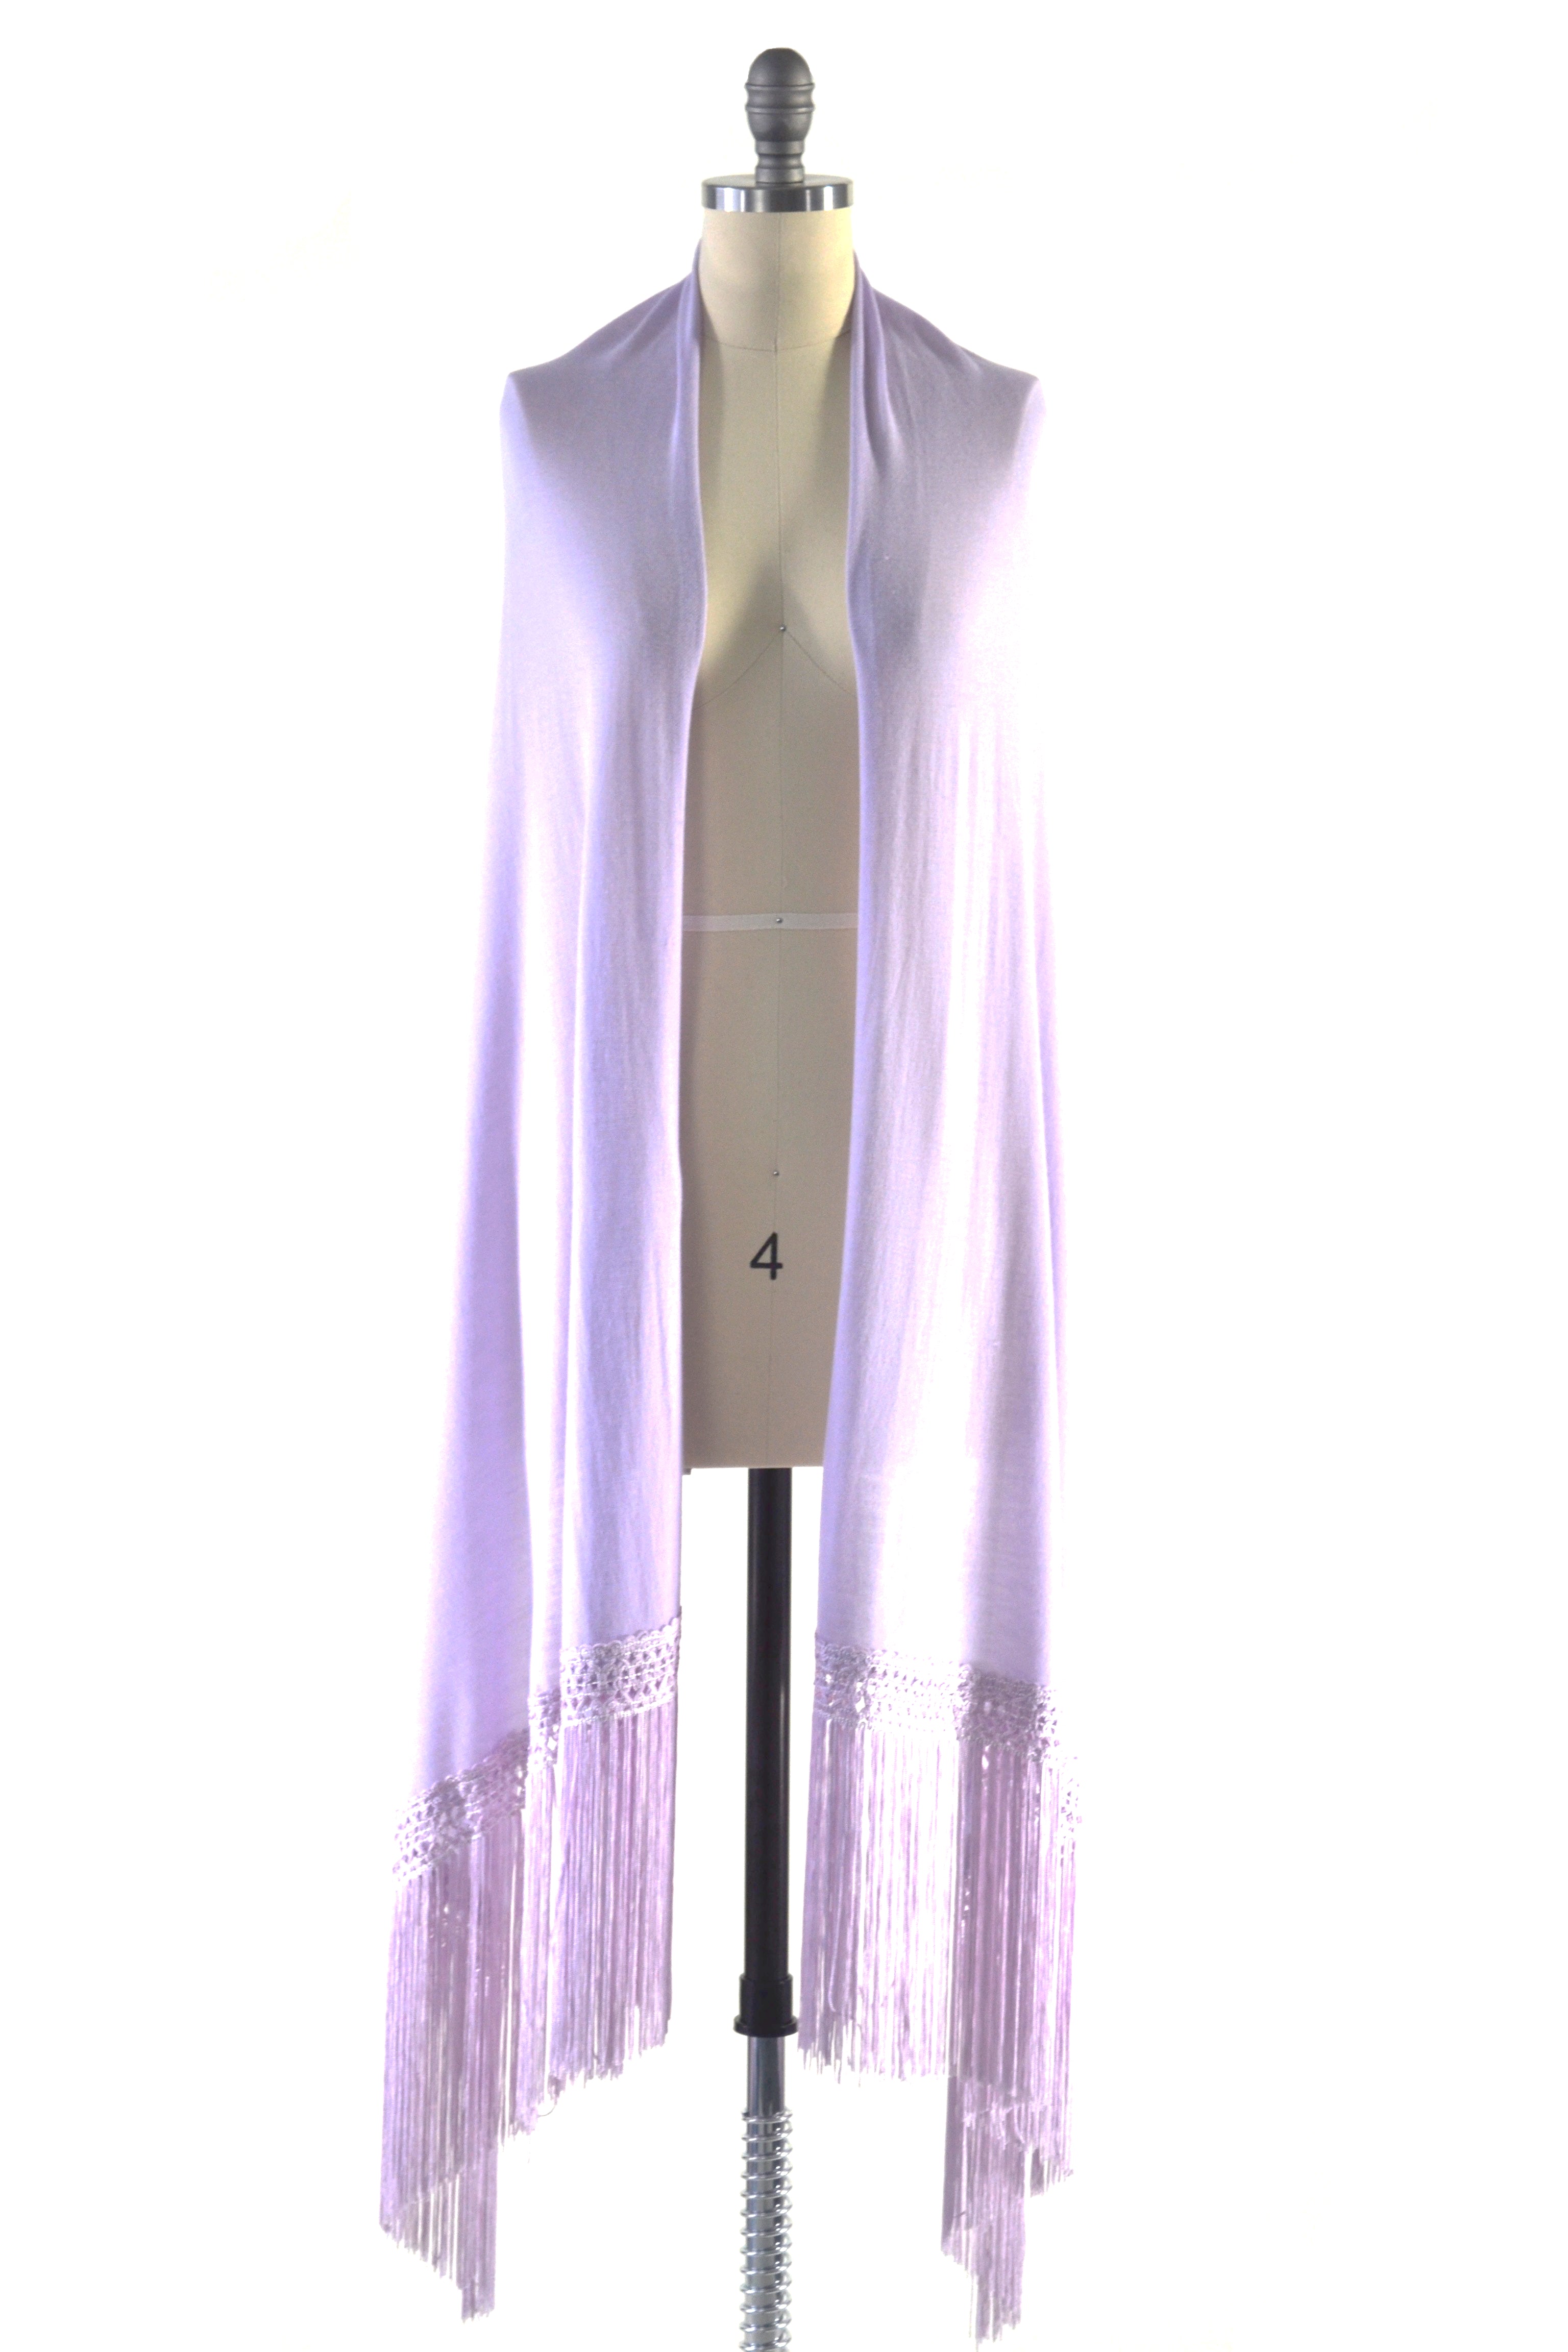 Fine Cashmere Wrap with Double Silky Macrame Fringe in Lavender